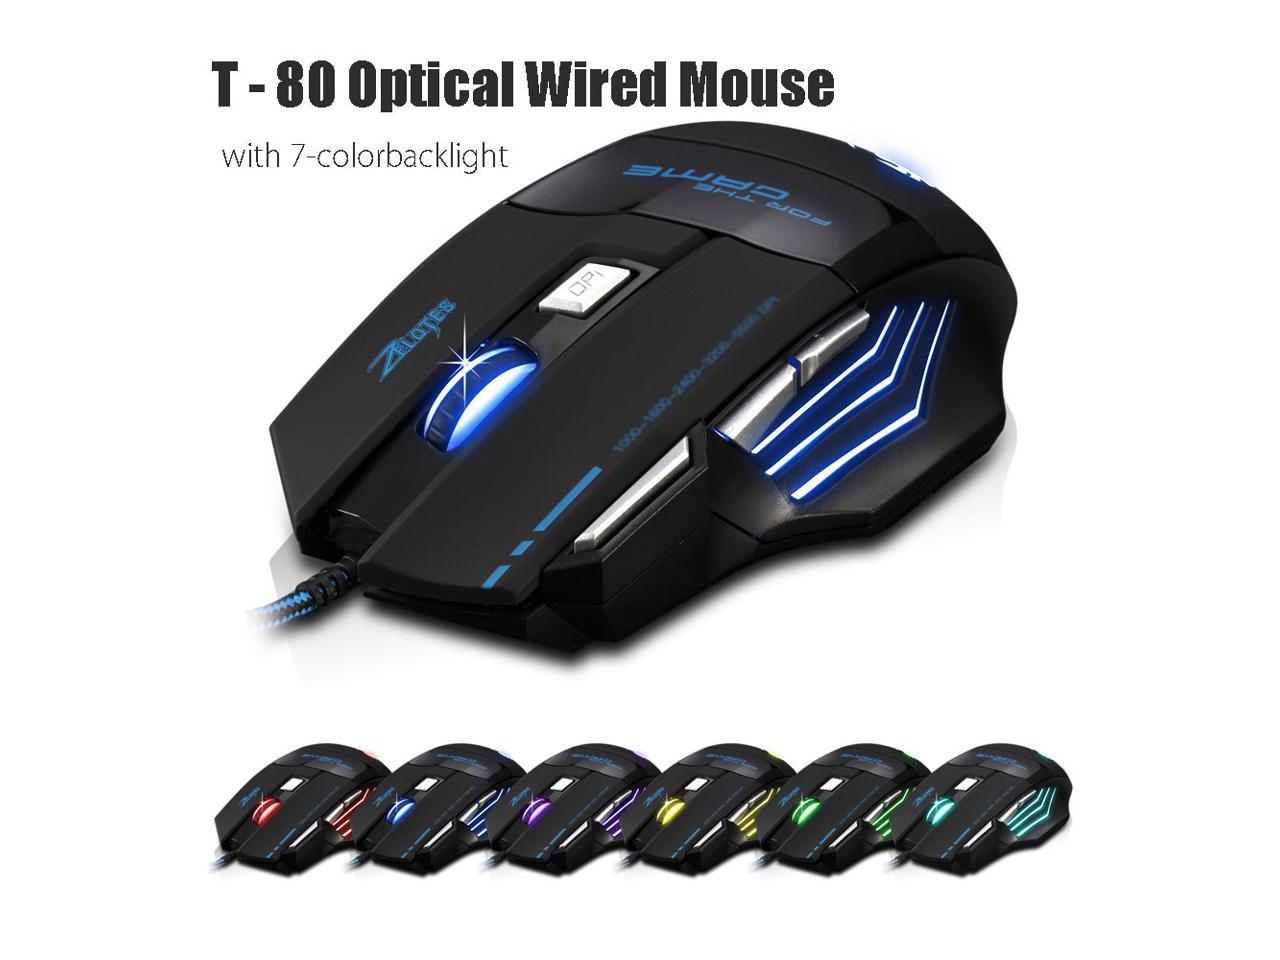 5500 DPI 7 Button Gaming Mouse Back-light Optical USB Wired Mice For PC Laptop